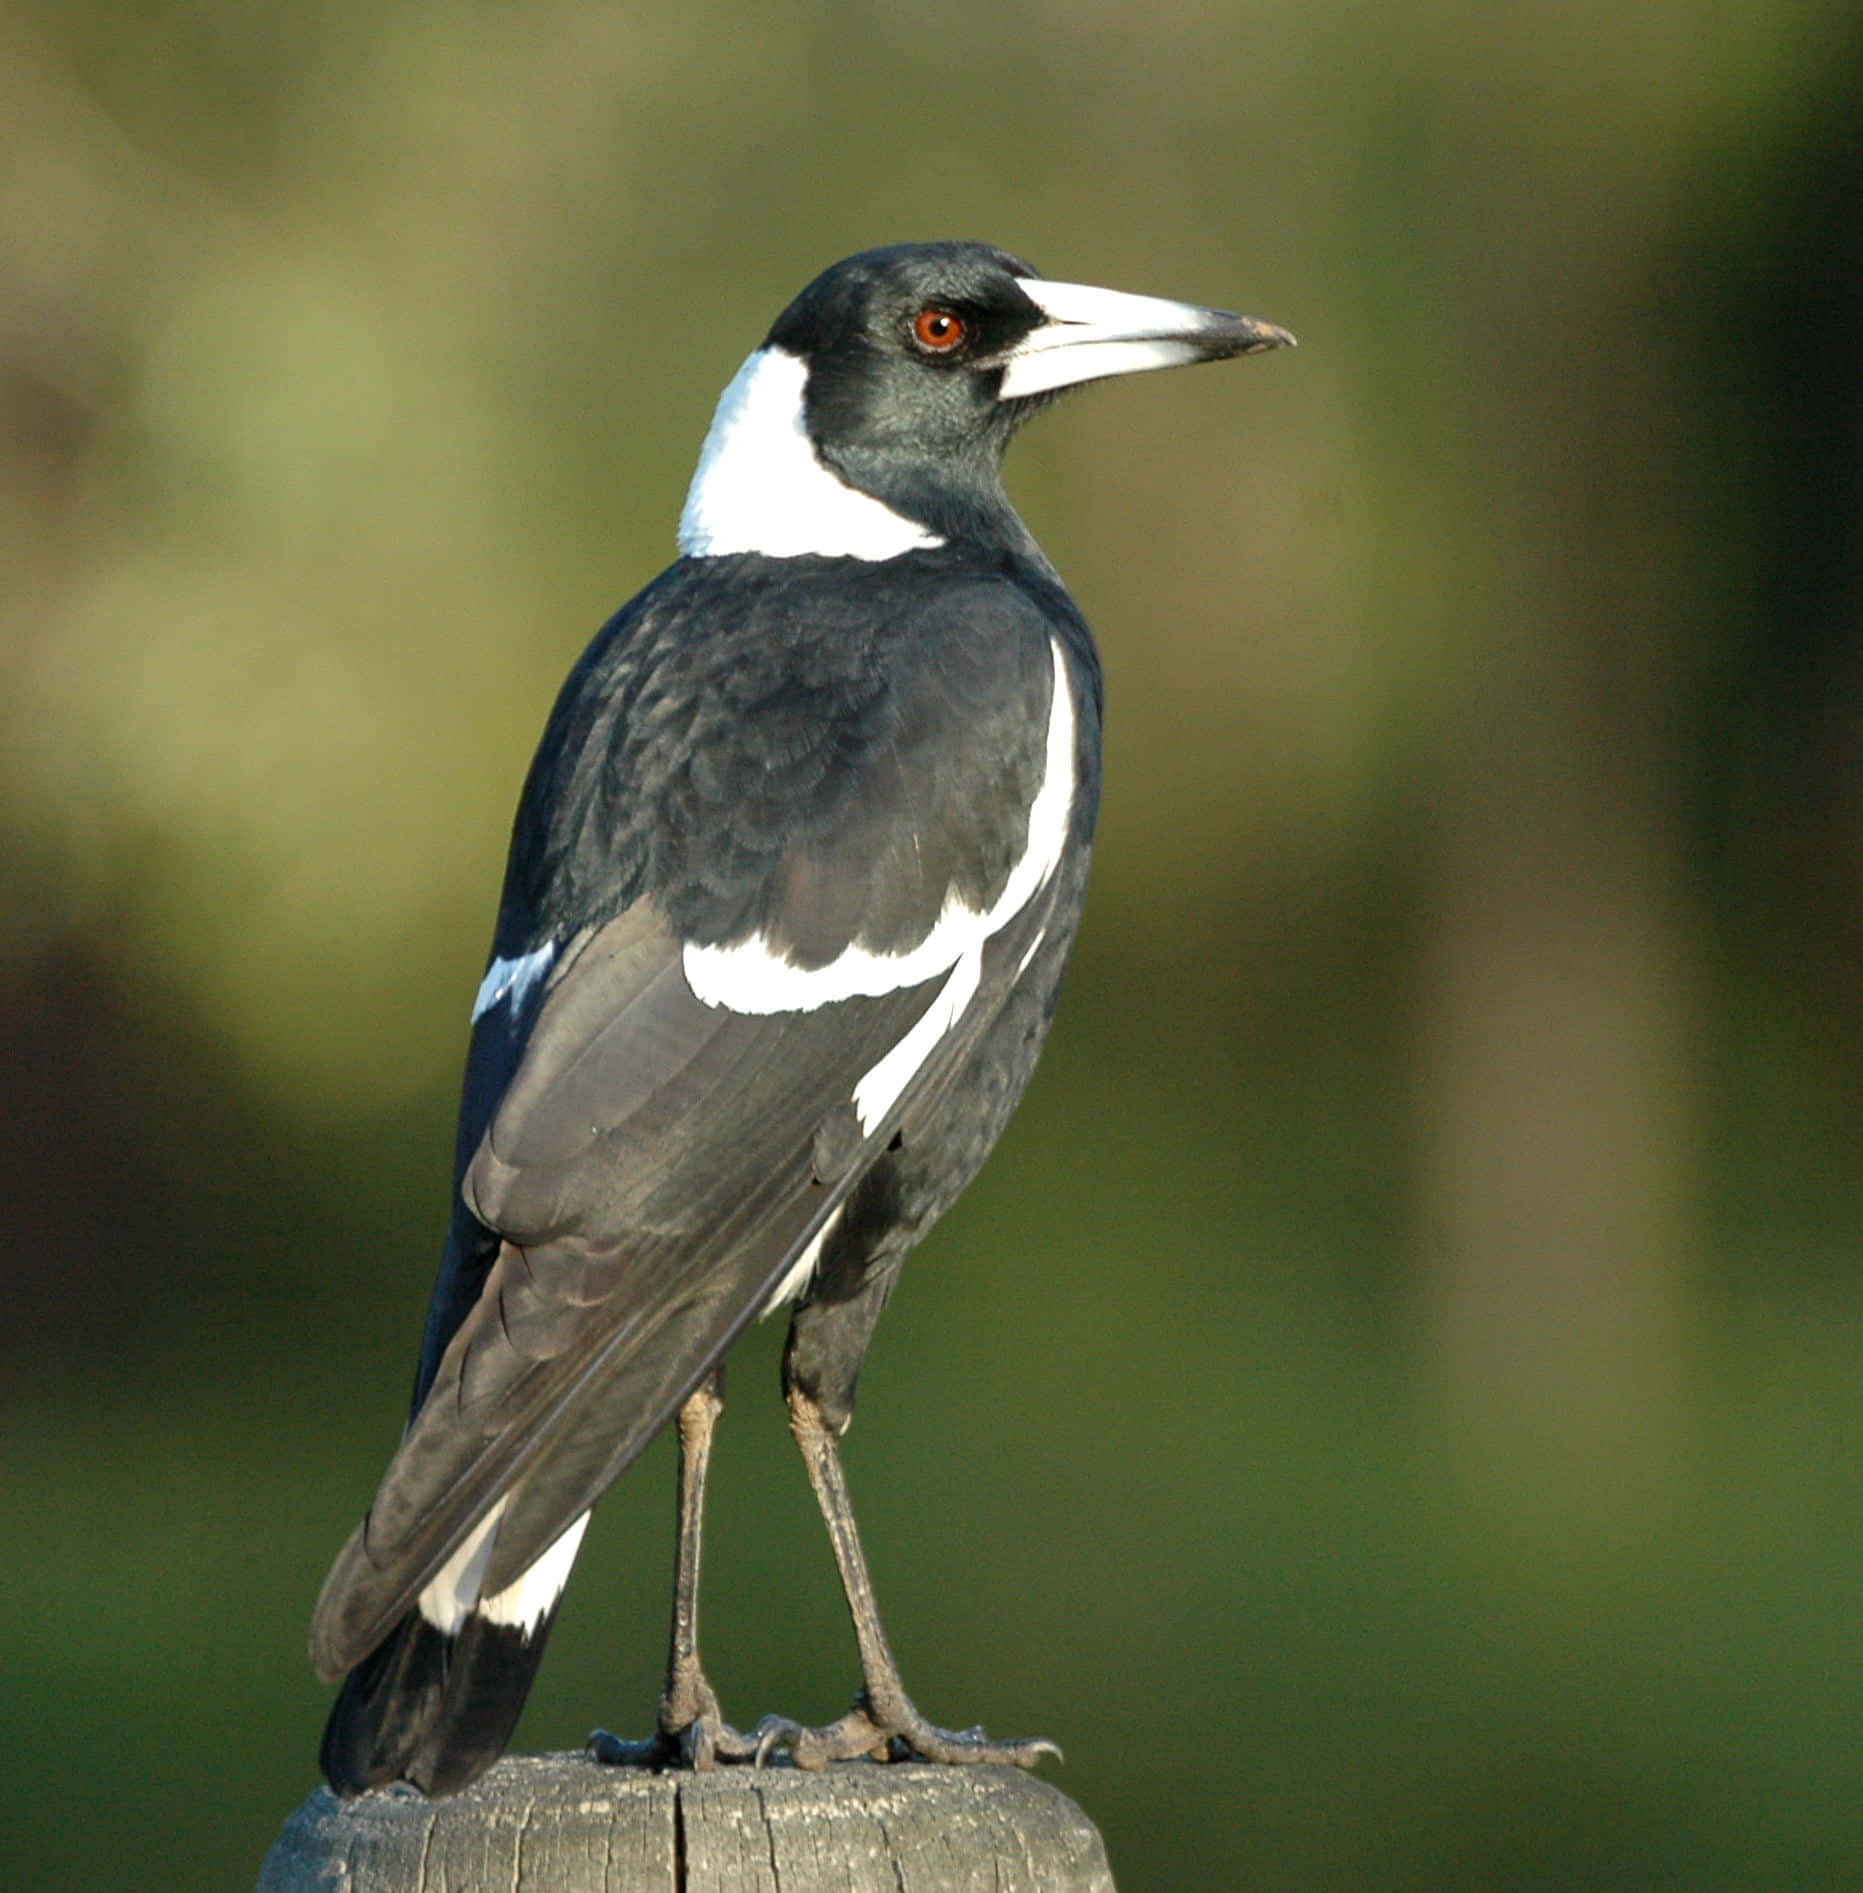 Australian Magpie Perched Outdoors Wallpaper